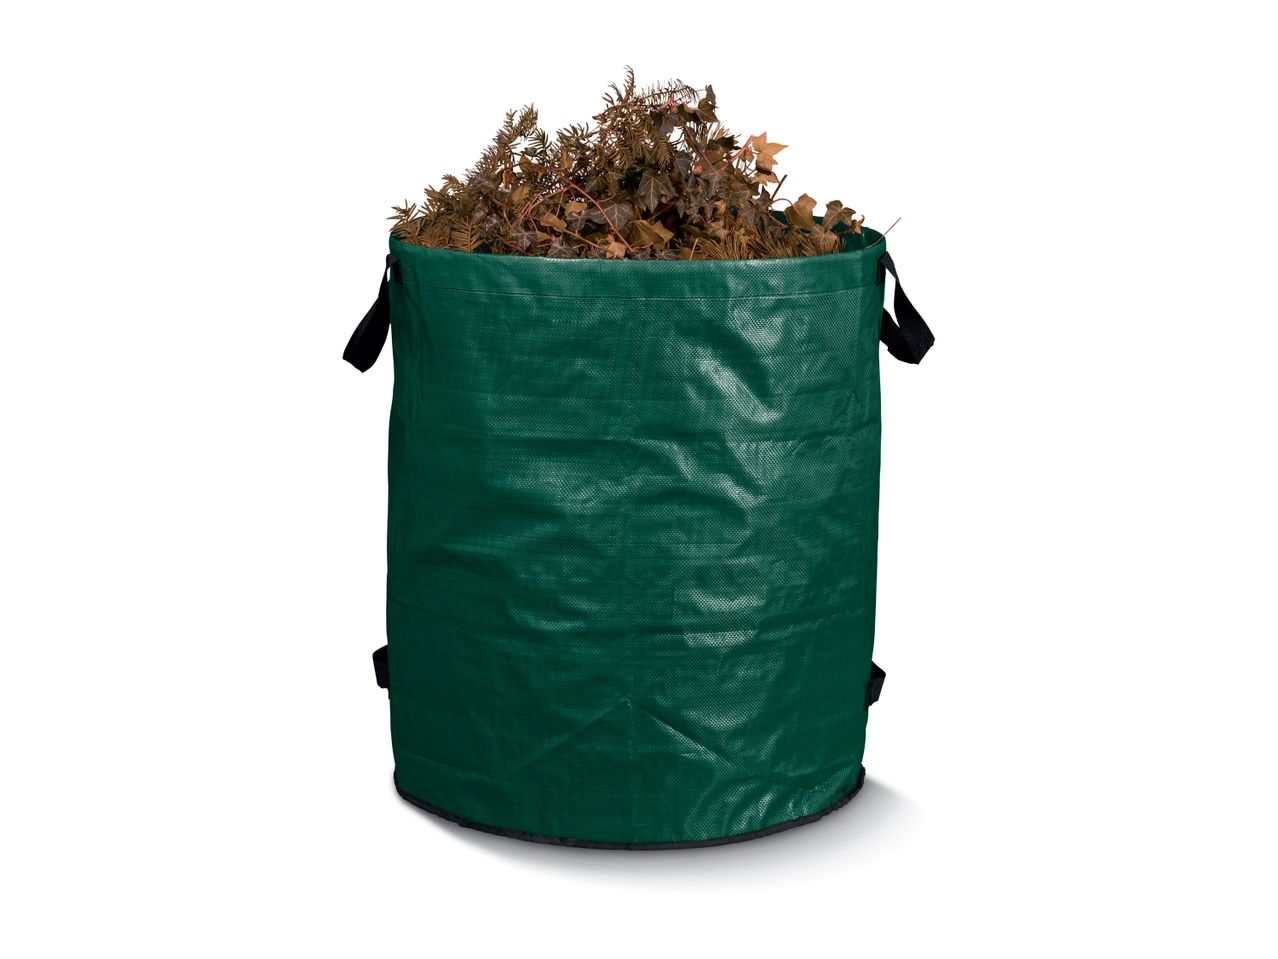 Go to full screen view: Garden Waste Bag - Image 2